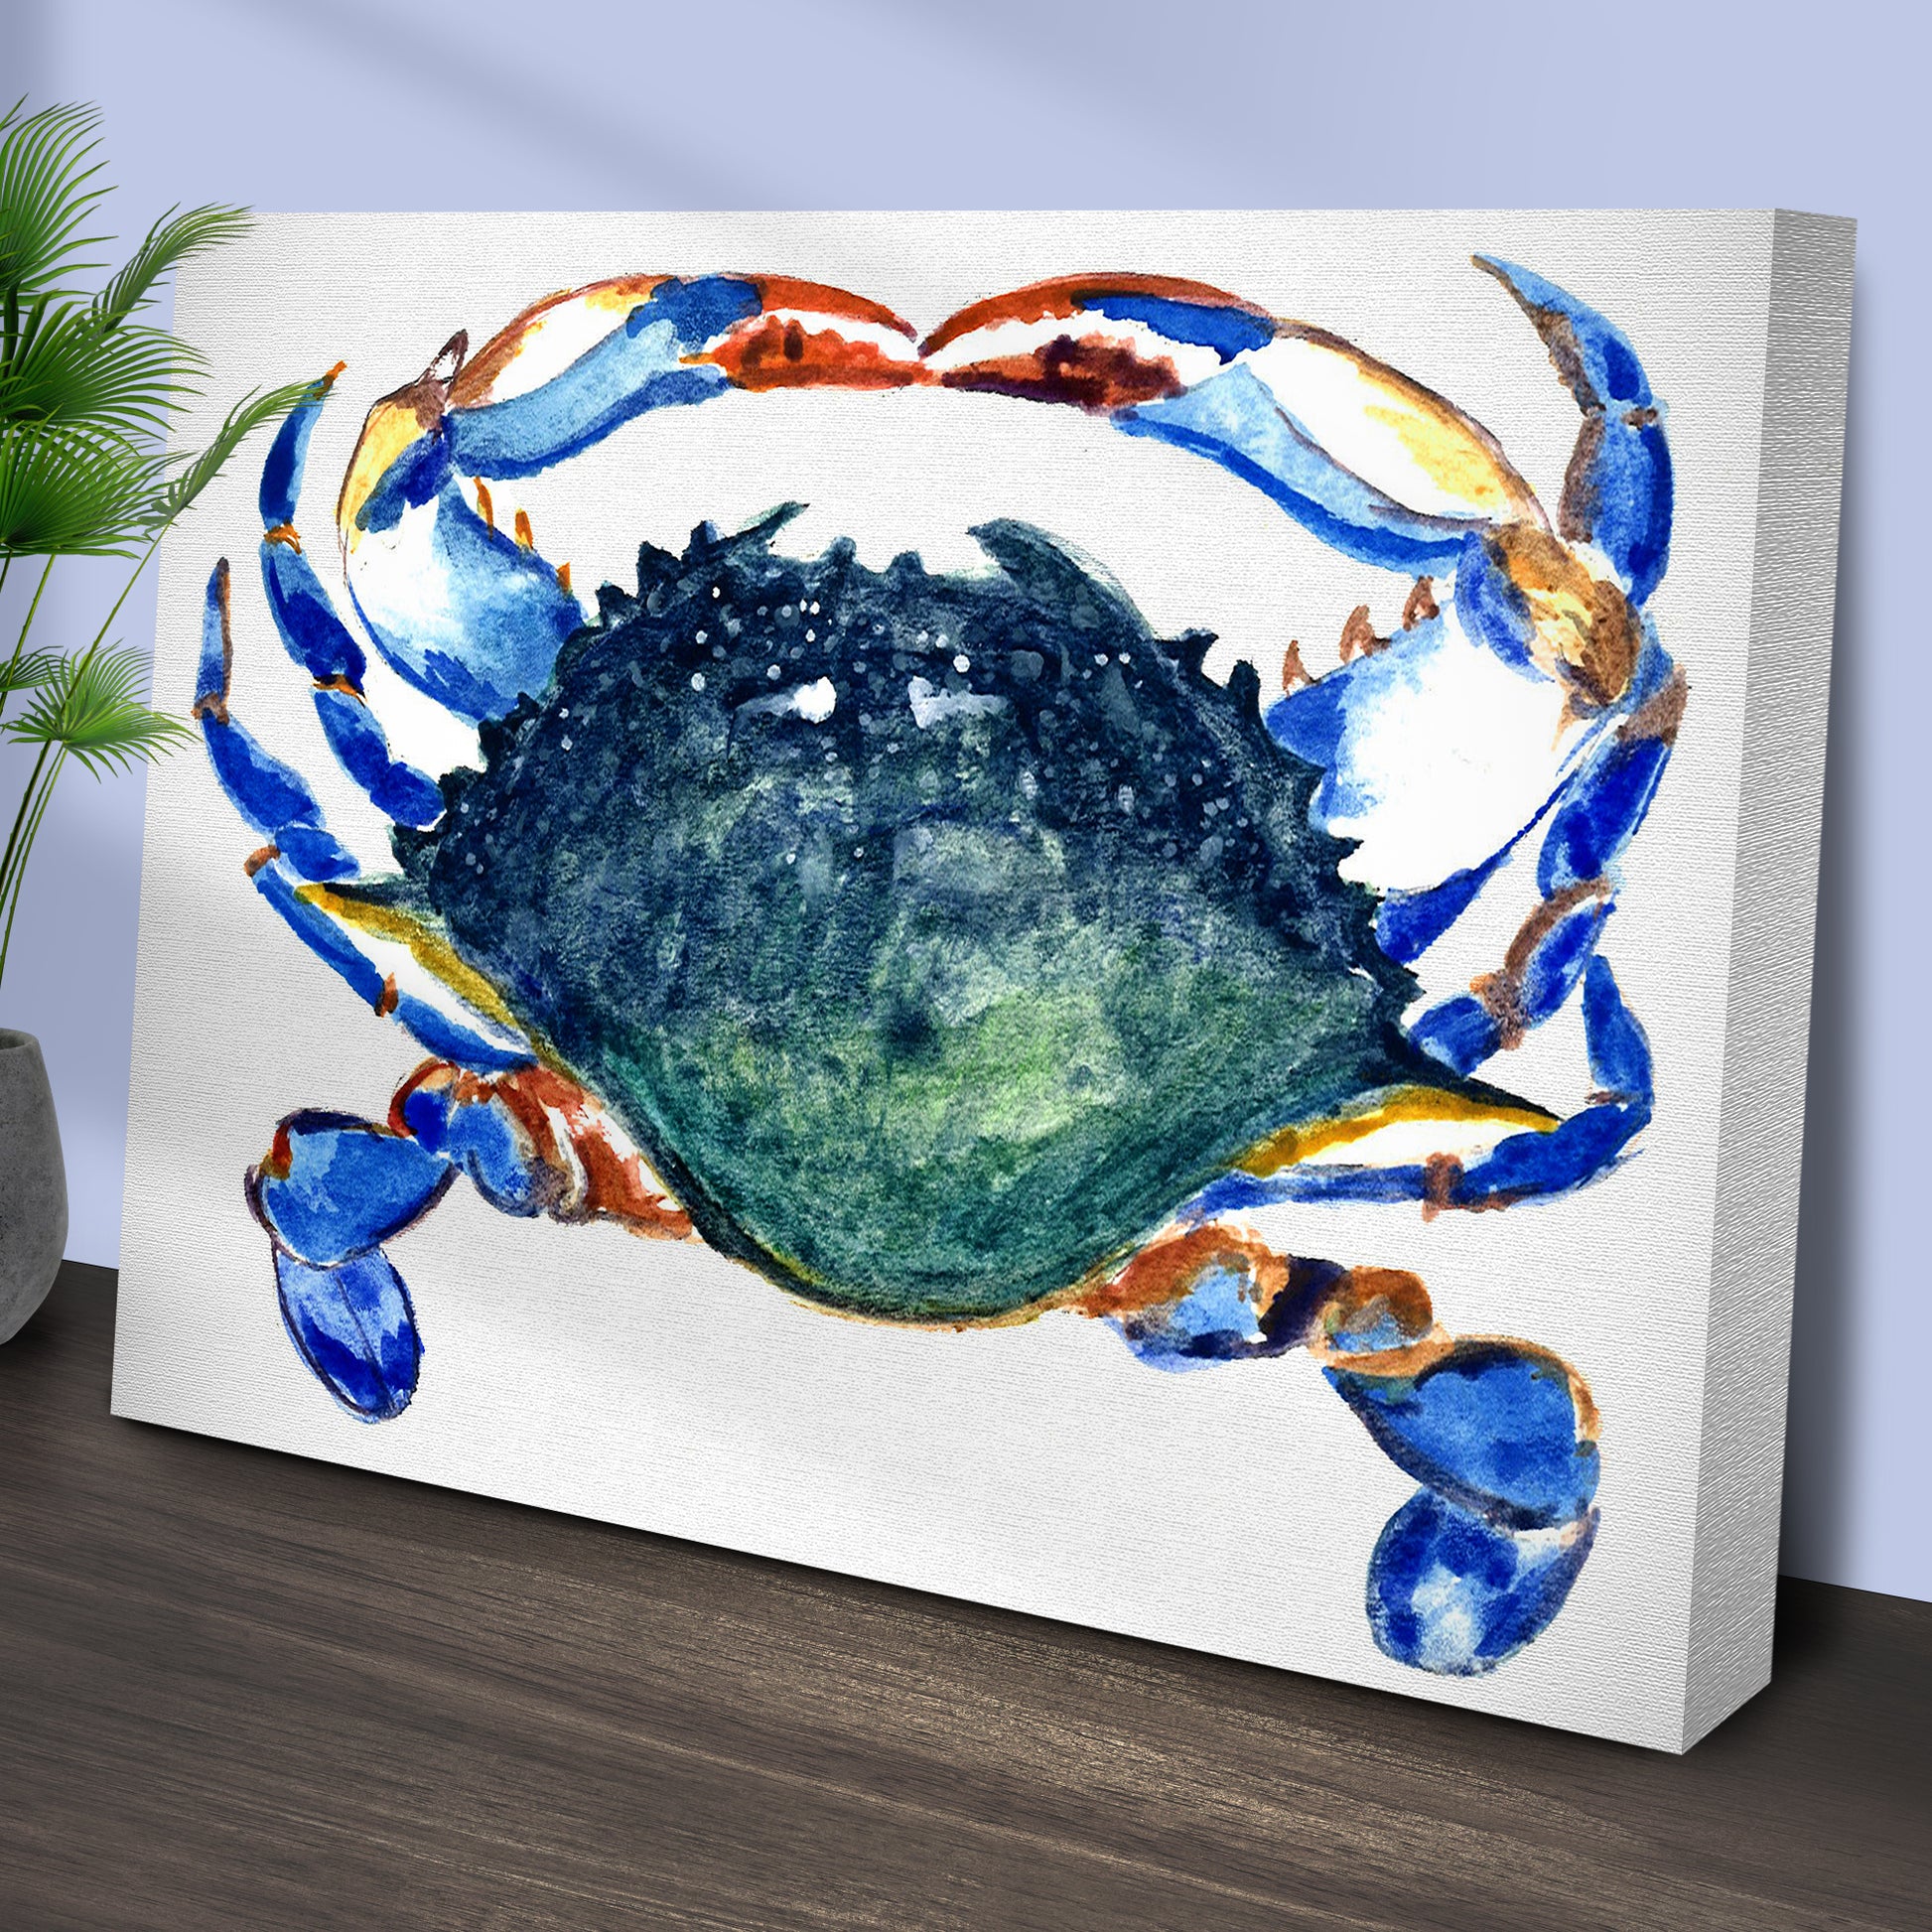 Crab Art Watercolor Wall Art Style 2 - Image by Tailored Canvases